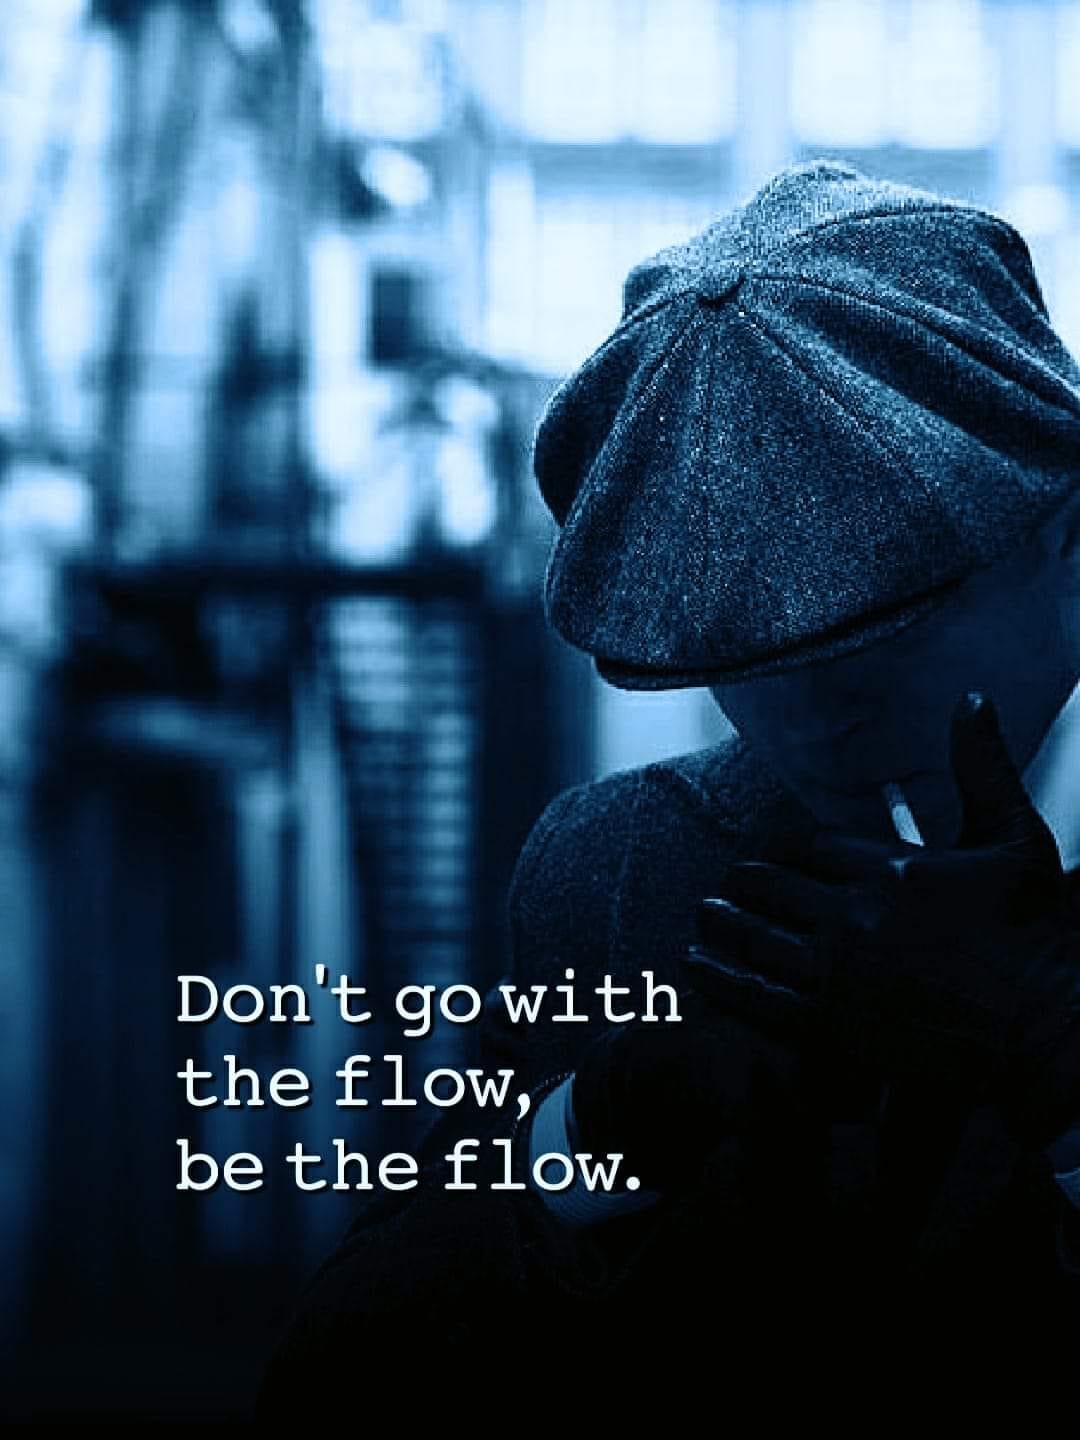 Do not go with the flow. Be the flow.”